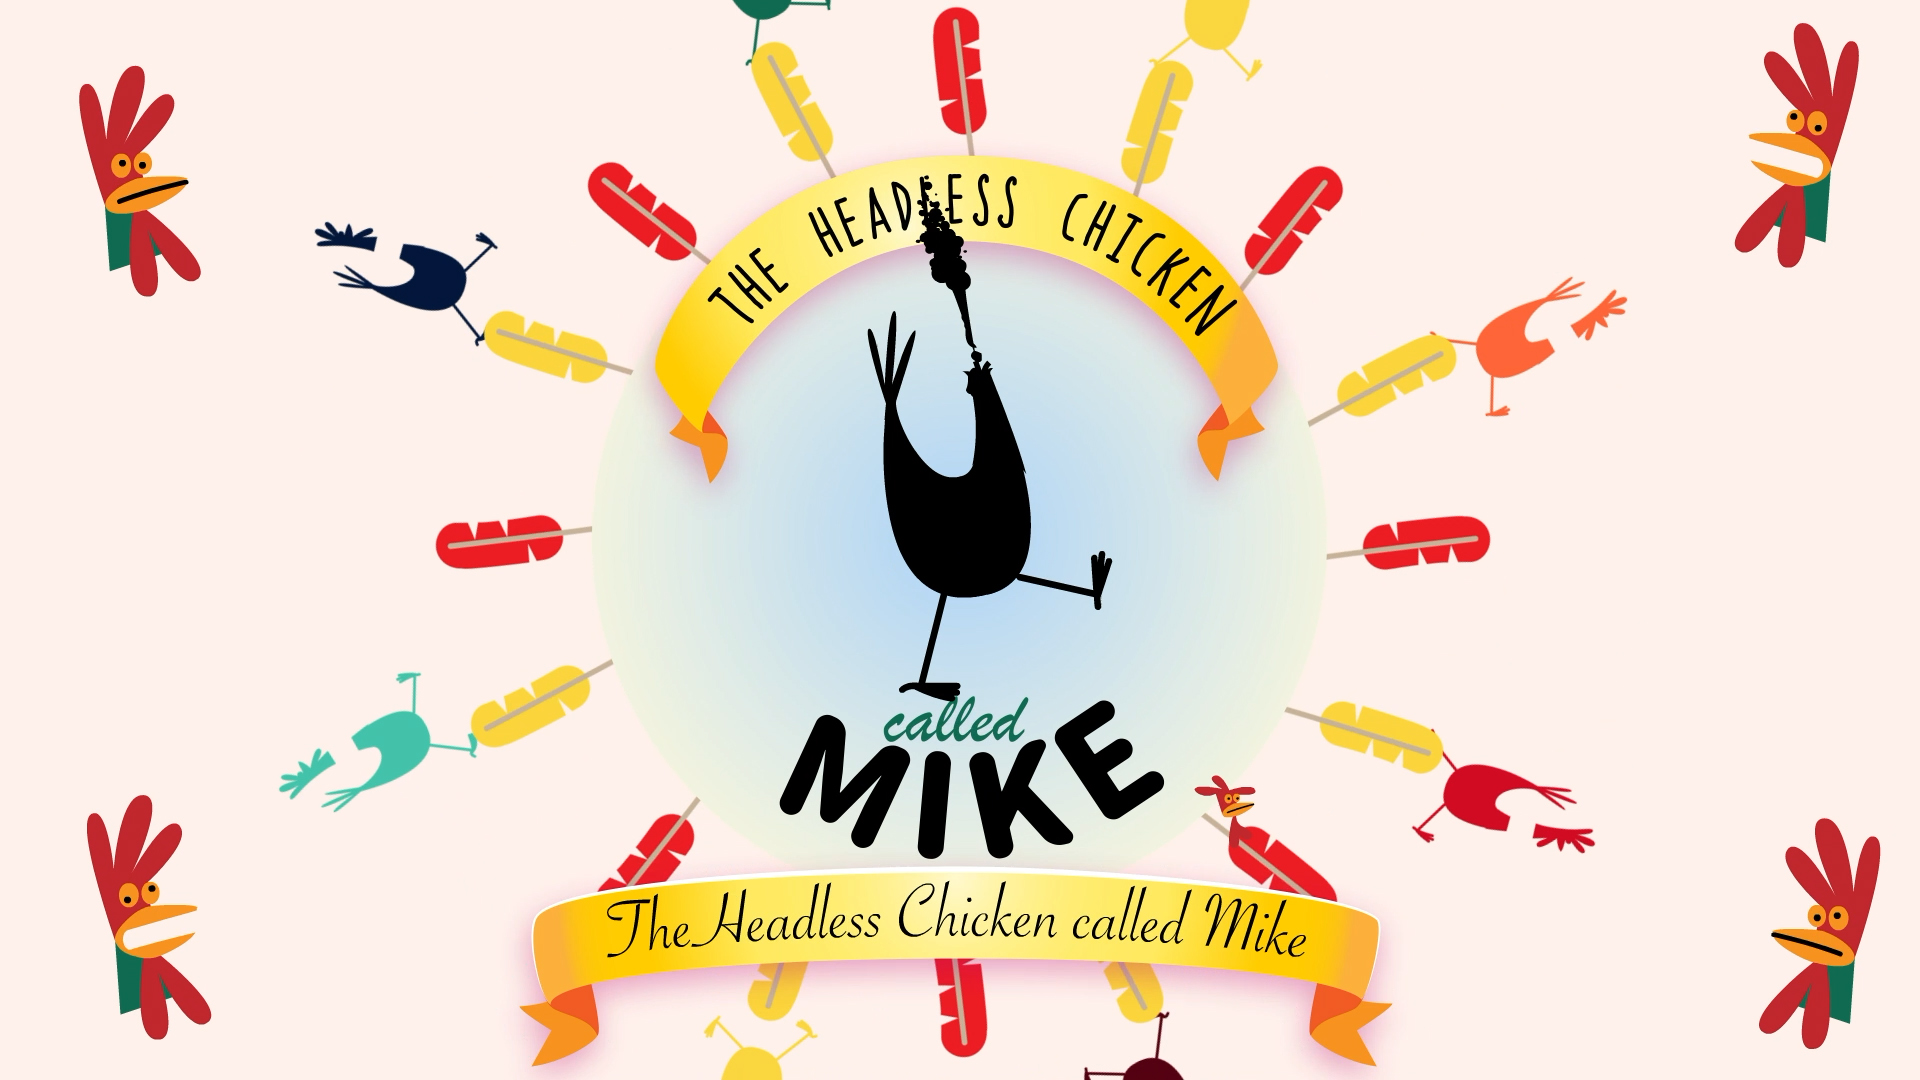 Mike the Headless Chicken - Kong Animation Studio Long Story Short